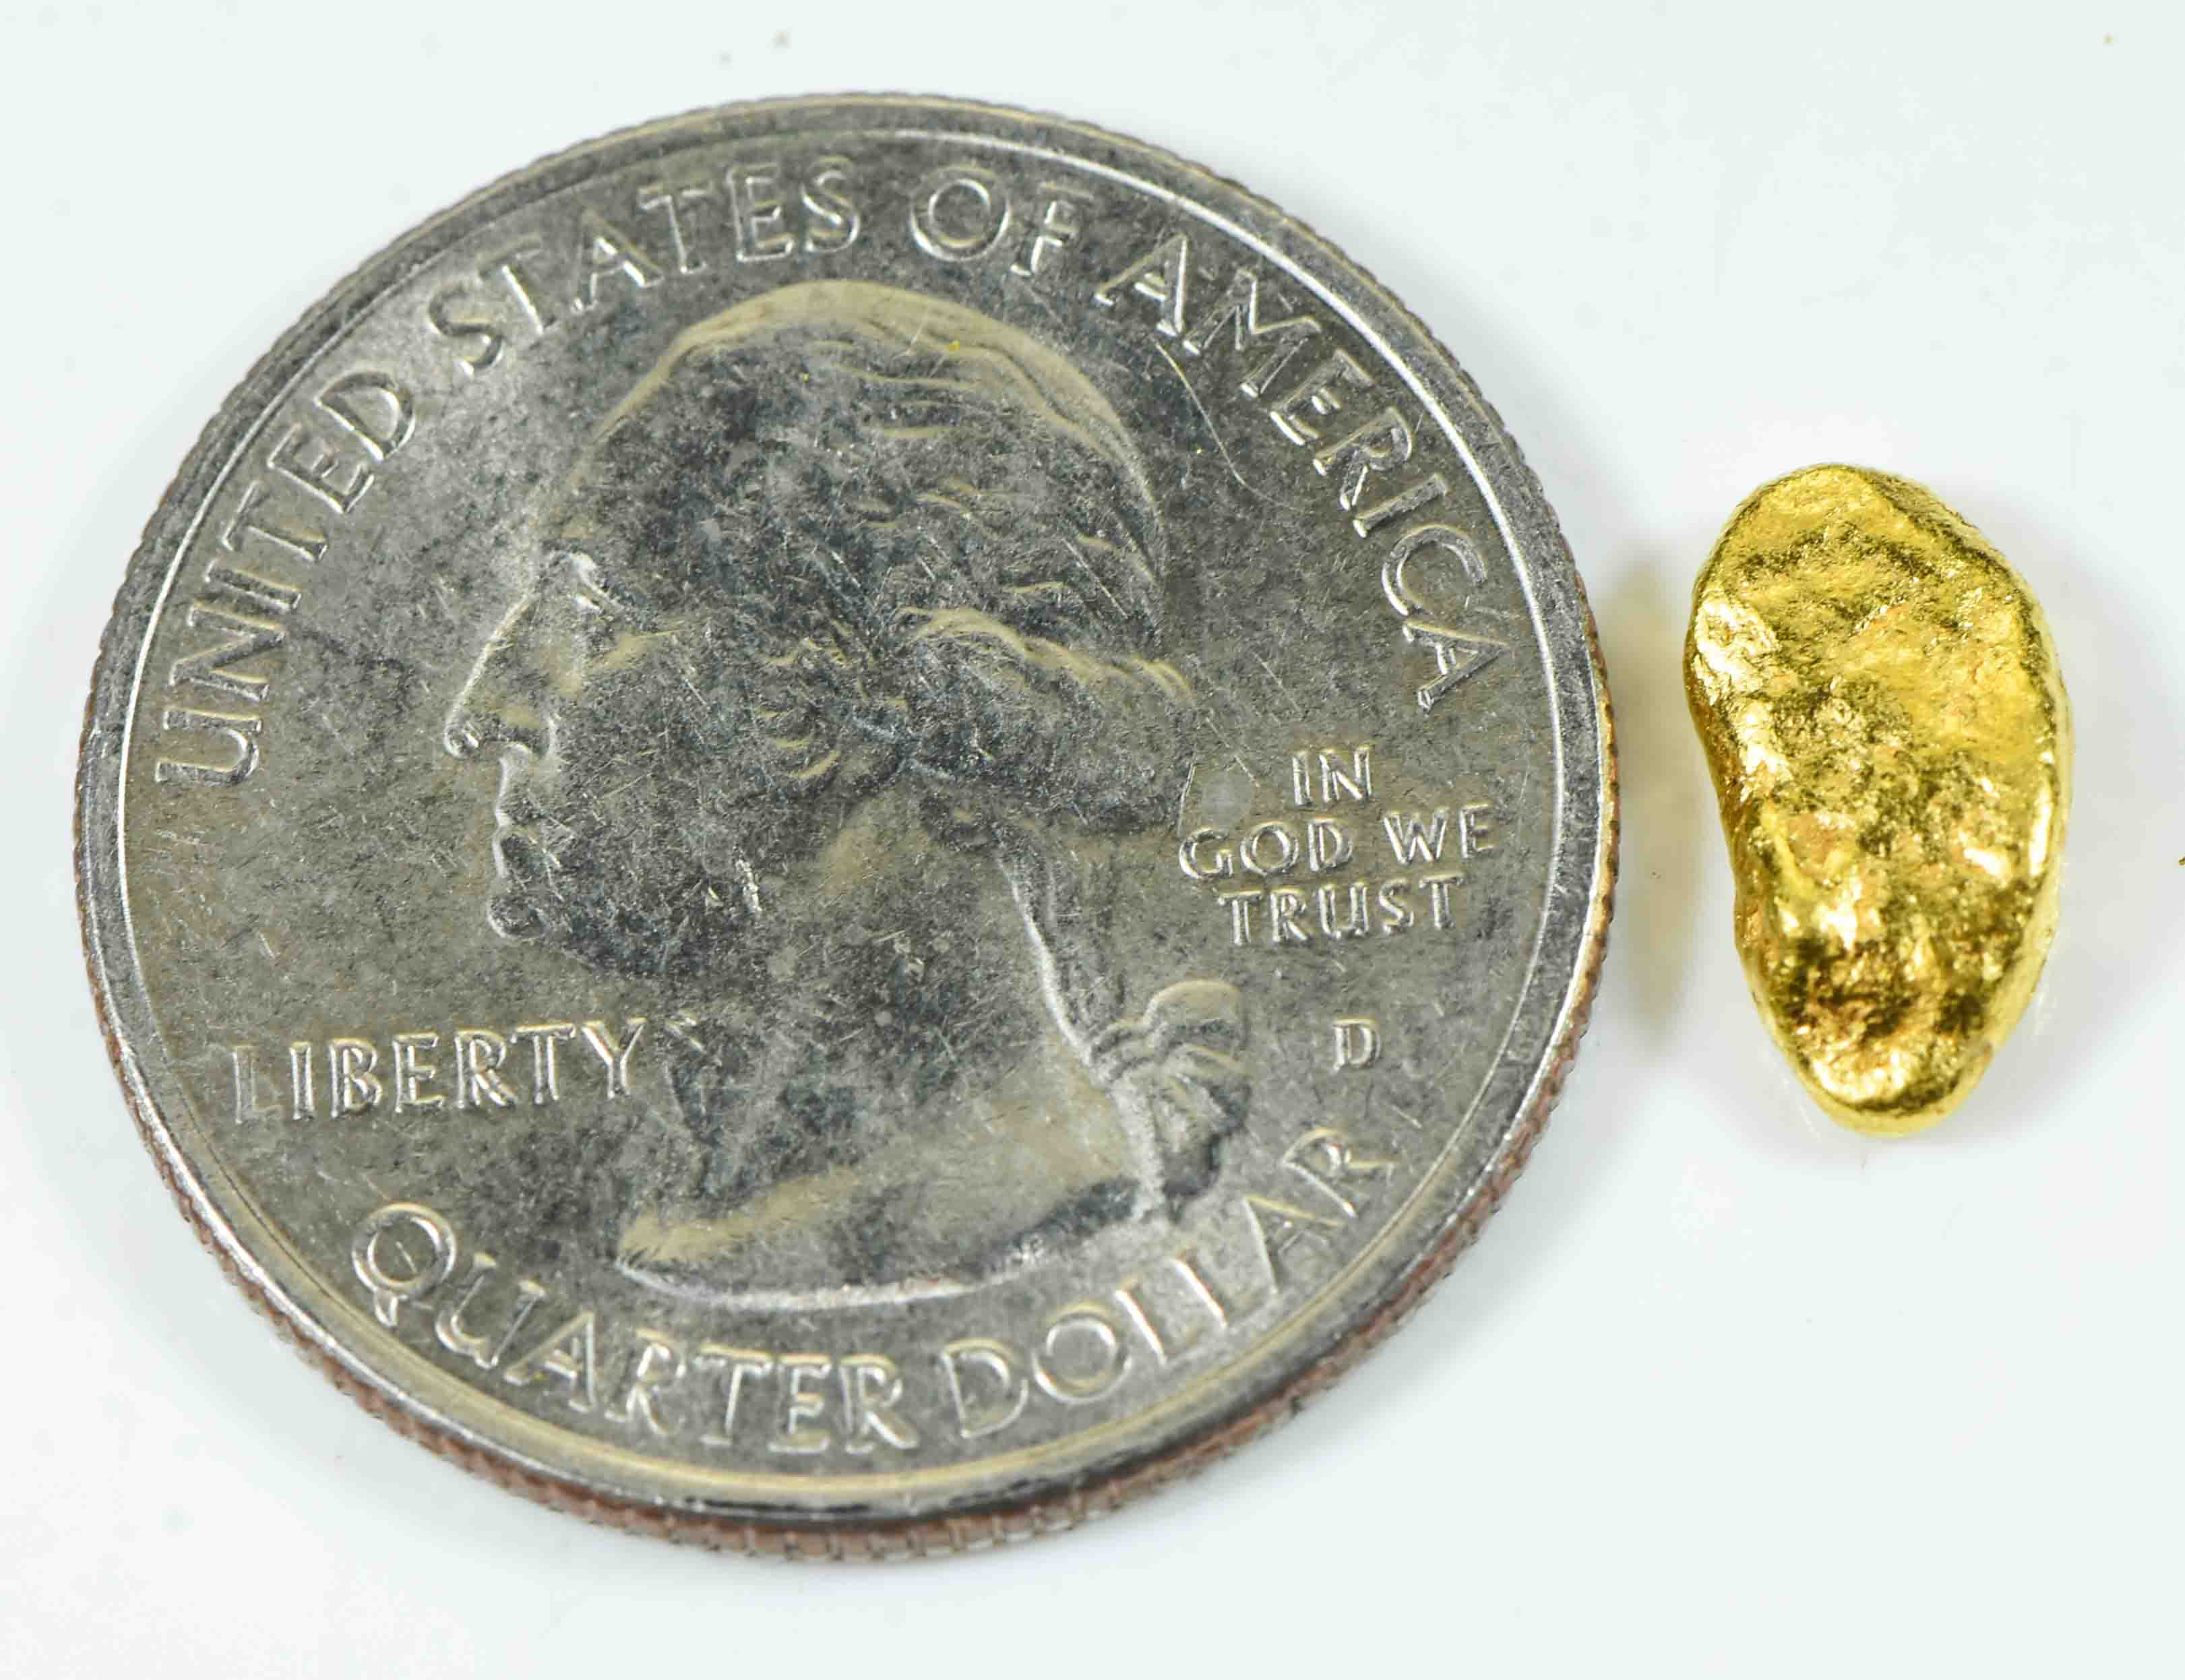 #39 California Gold Nugget 1.74 Grams Authentic Natural